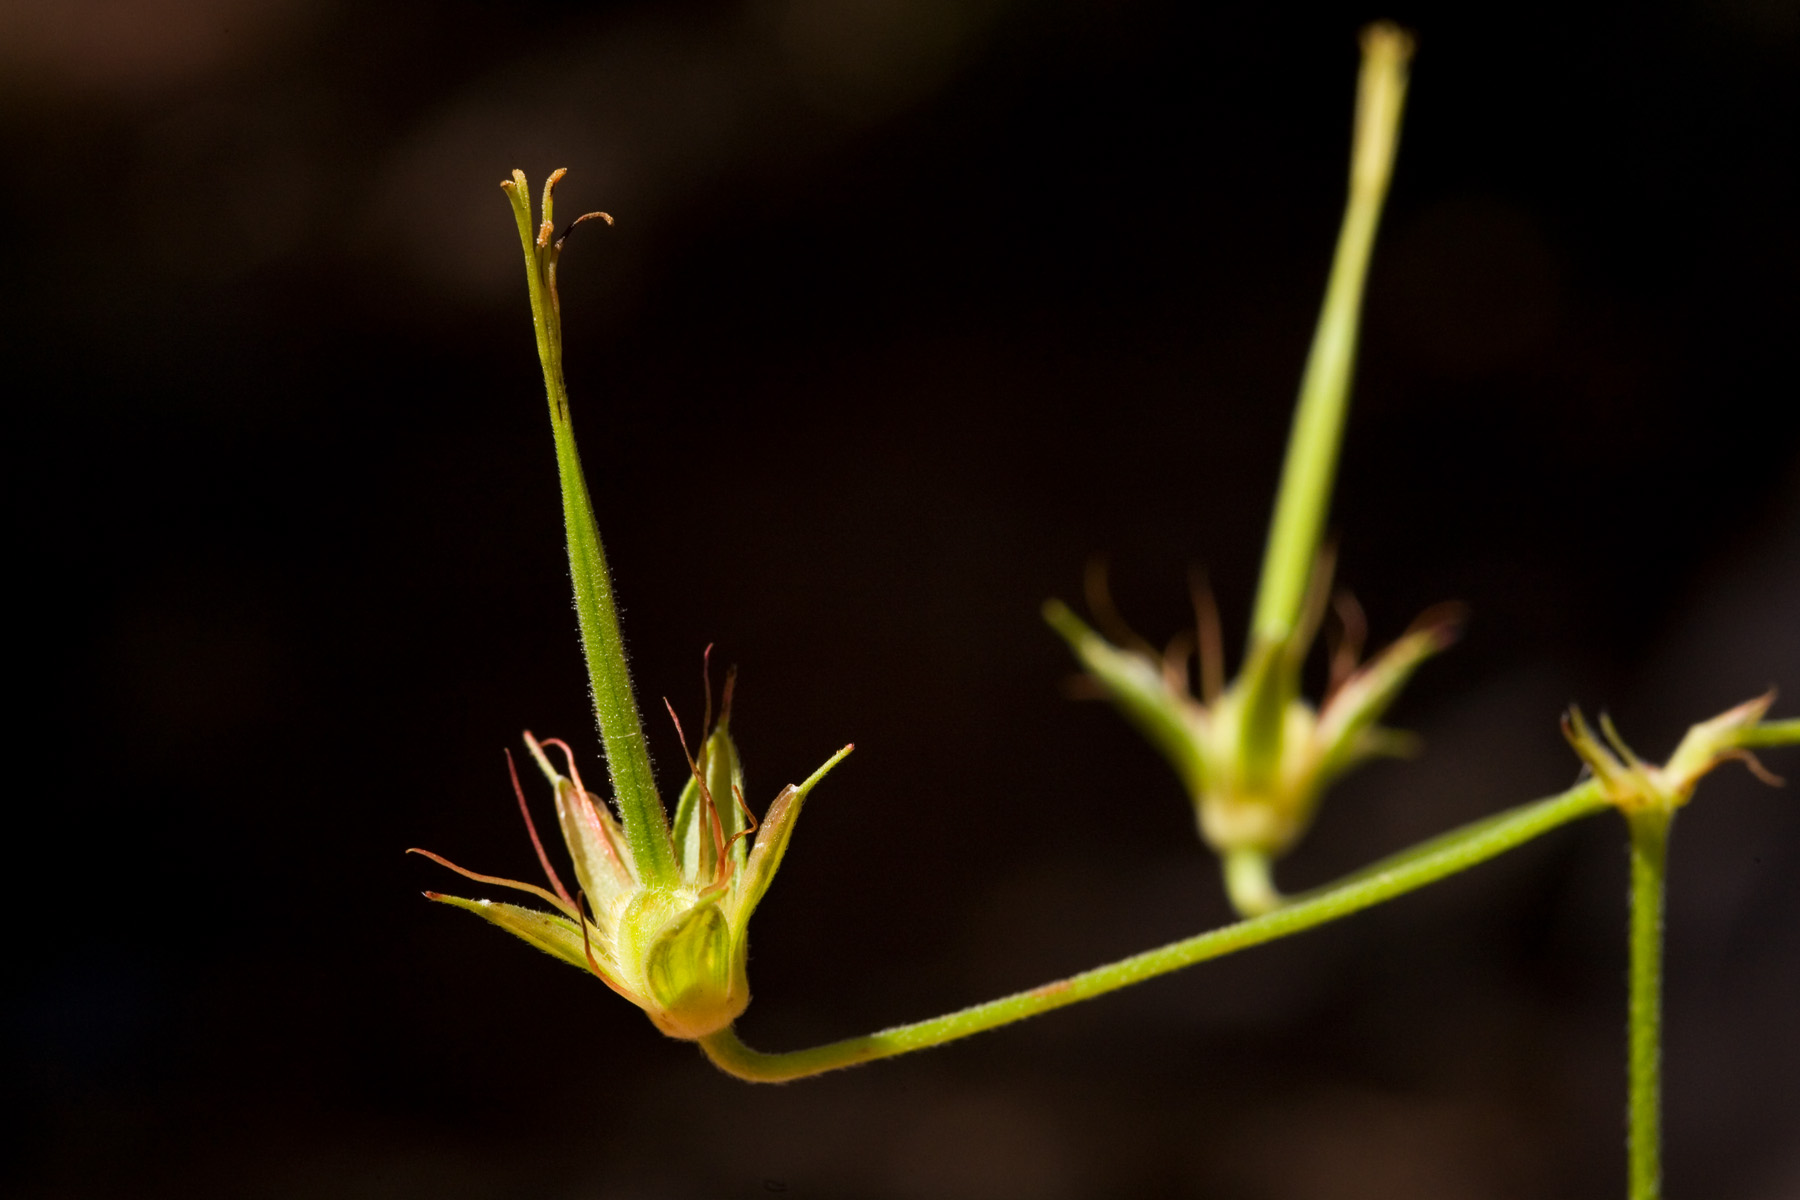 Fruit capsules of Geranium caespitosum that remain after flowers have finished blooming